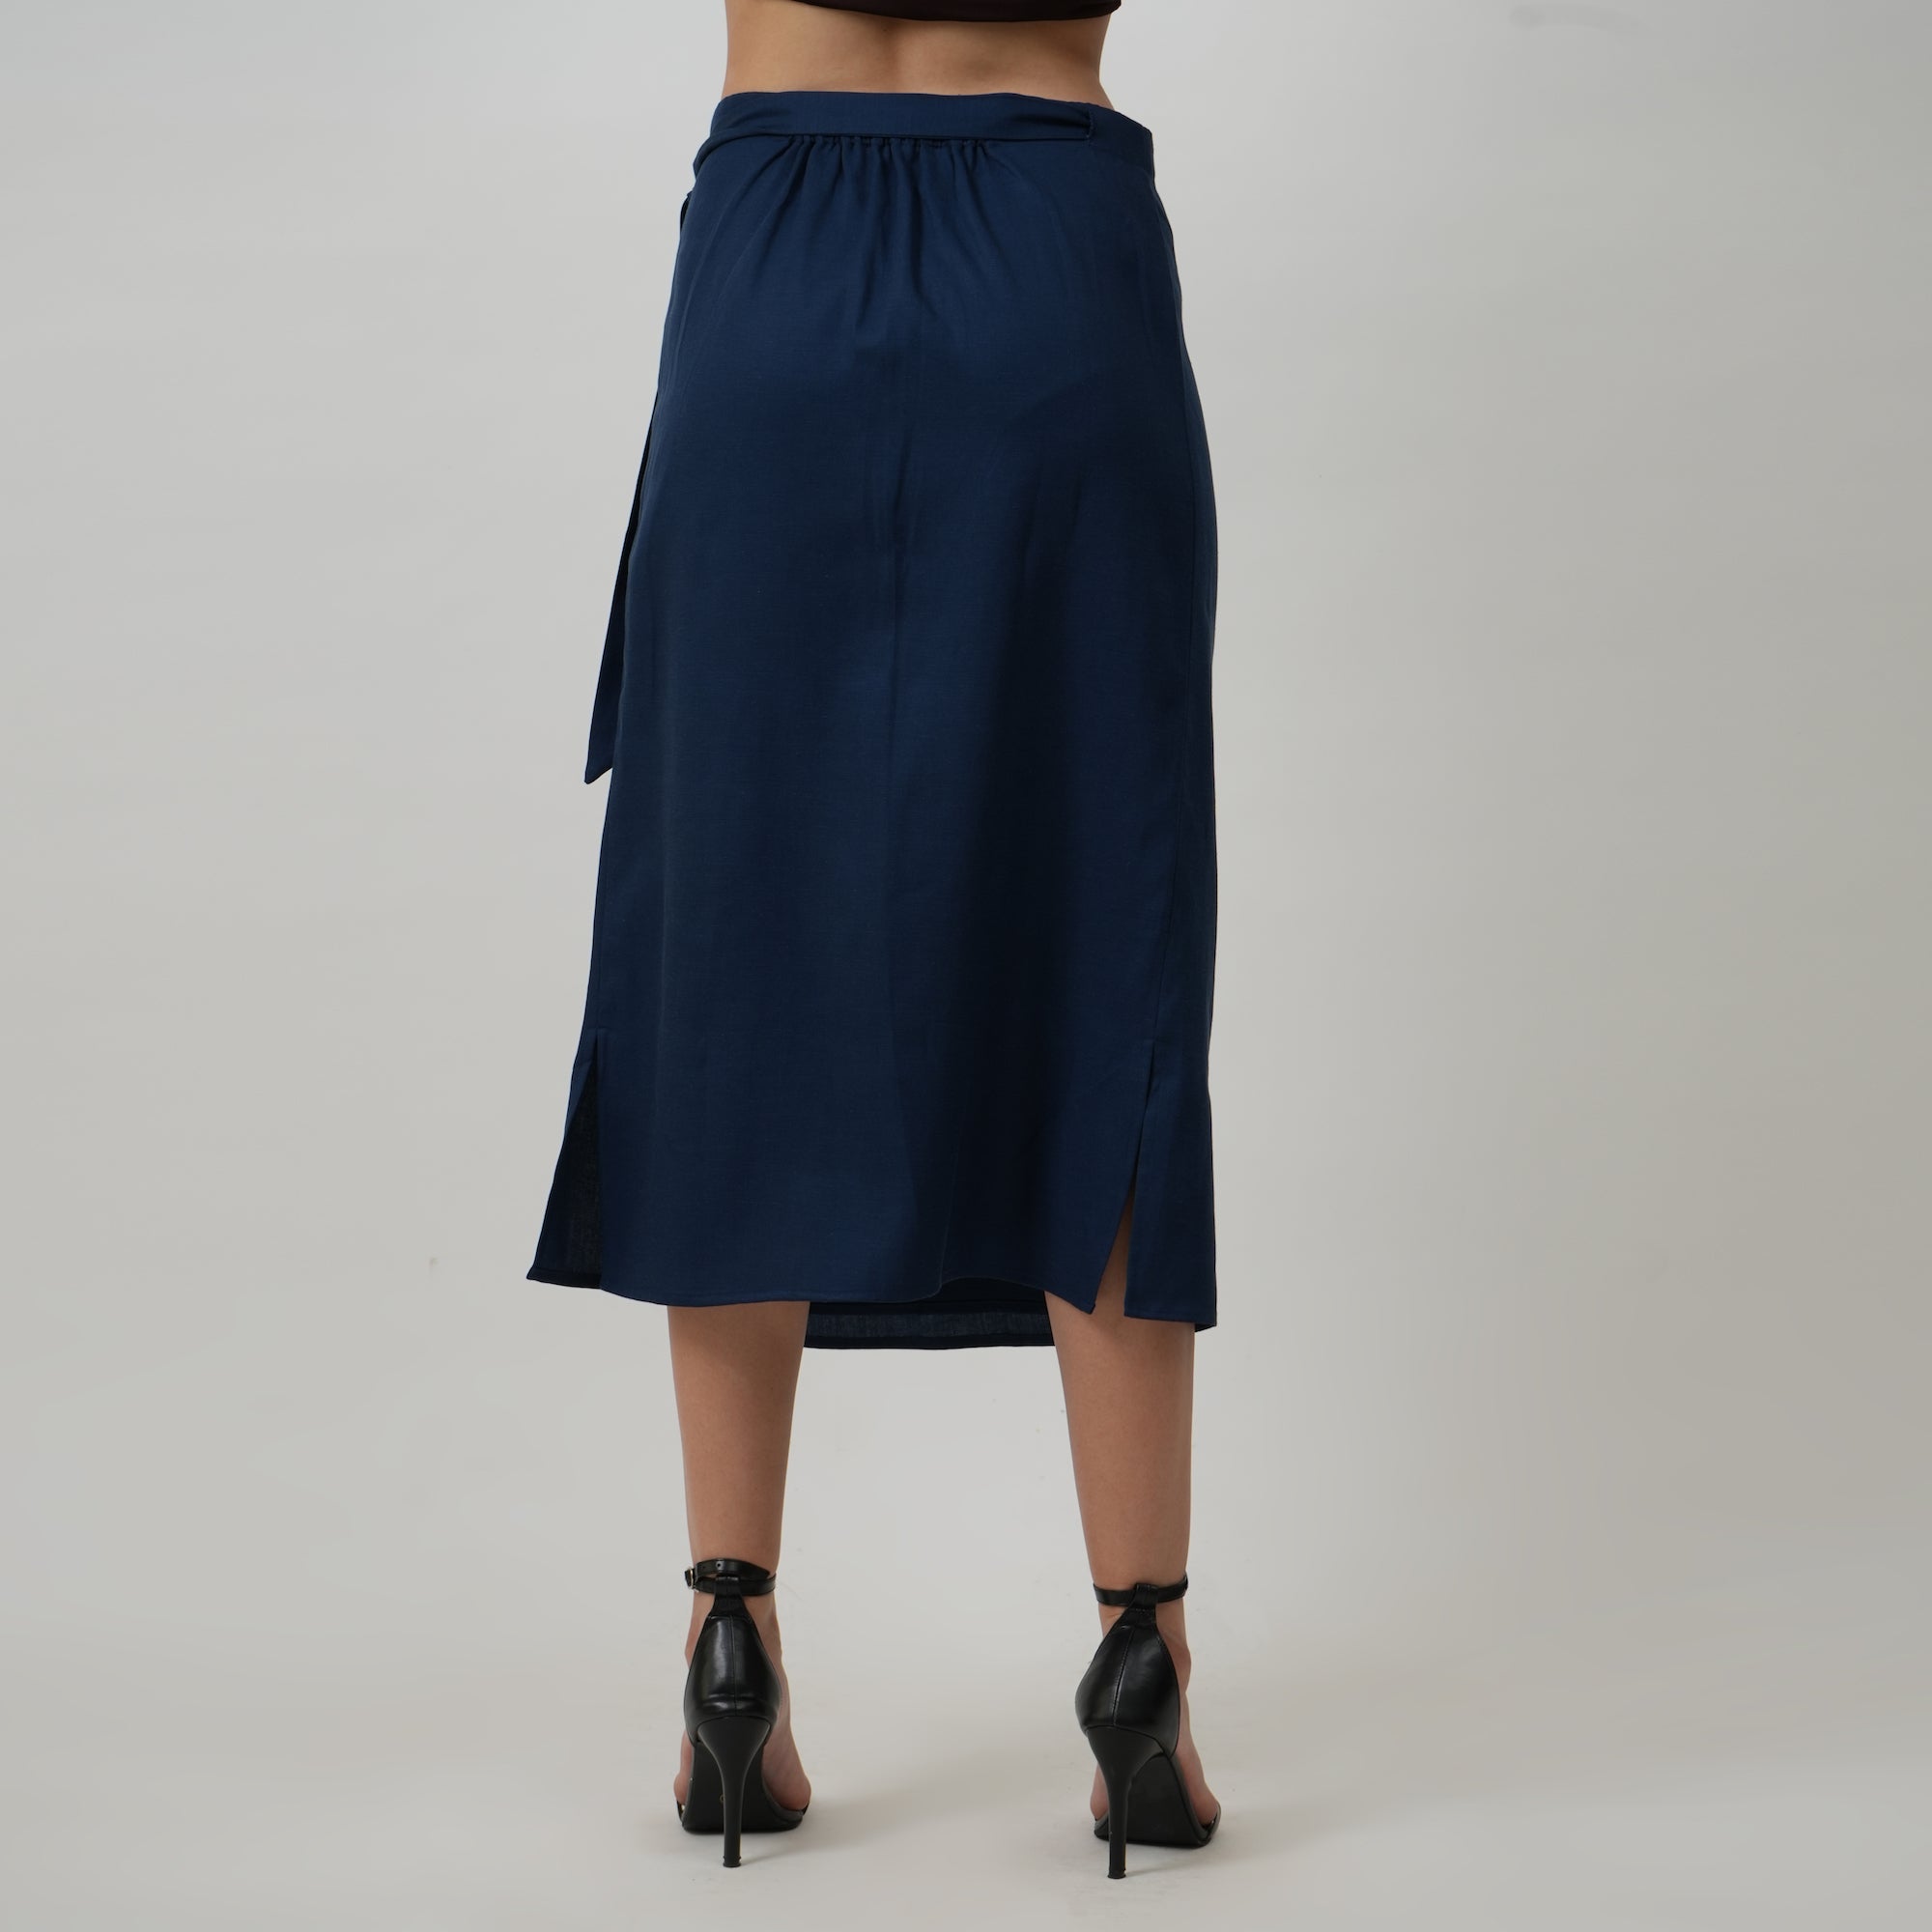 Stella Set of 2 - Shell Top & Wrap Skirt Coffee Brown & Navy Blue